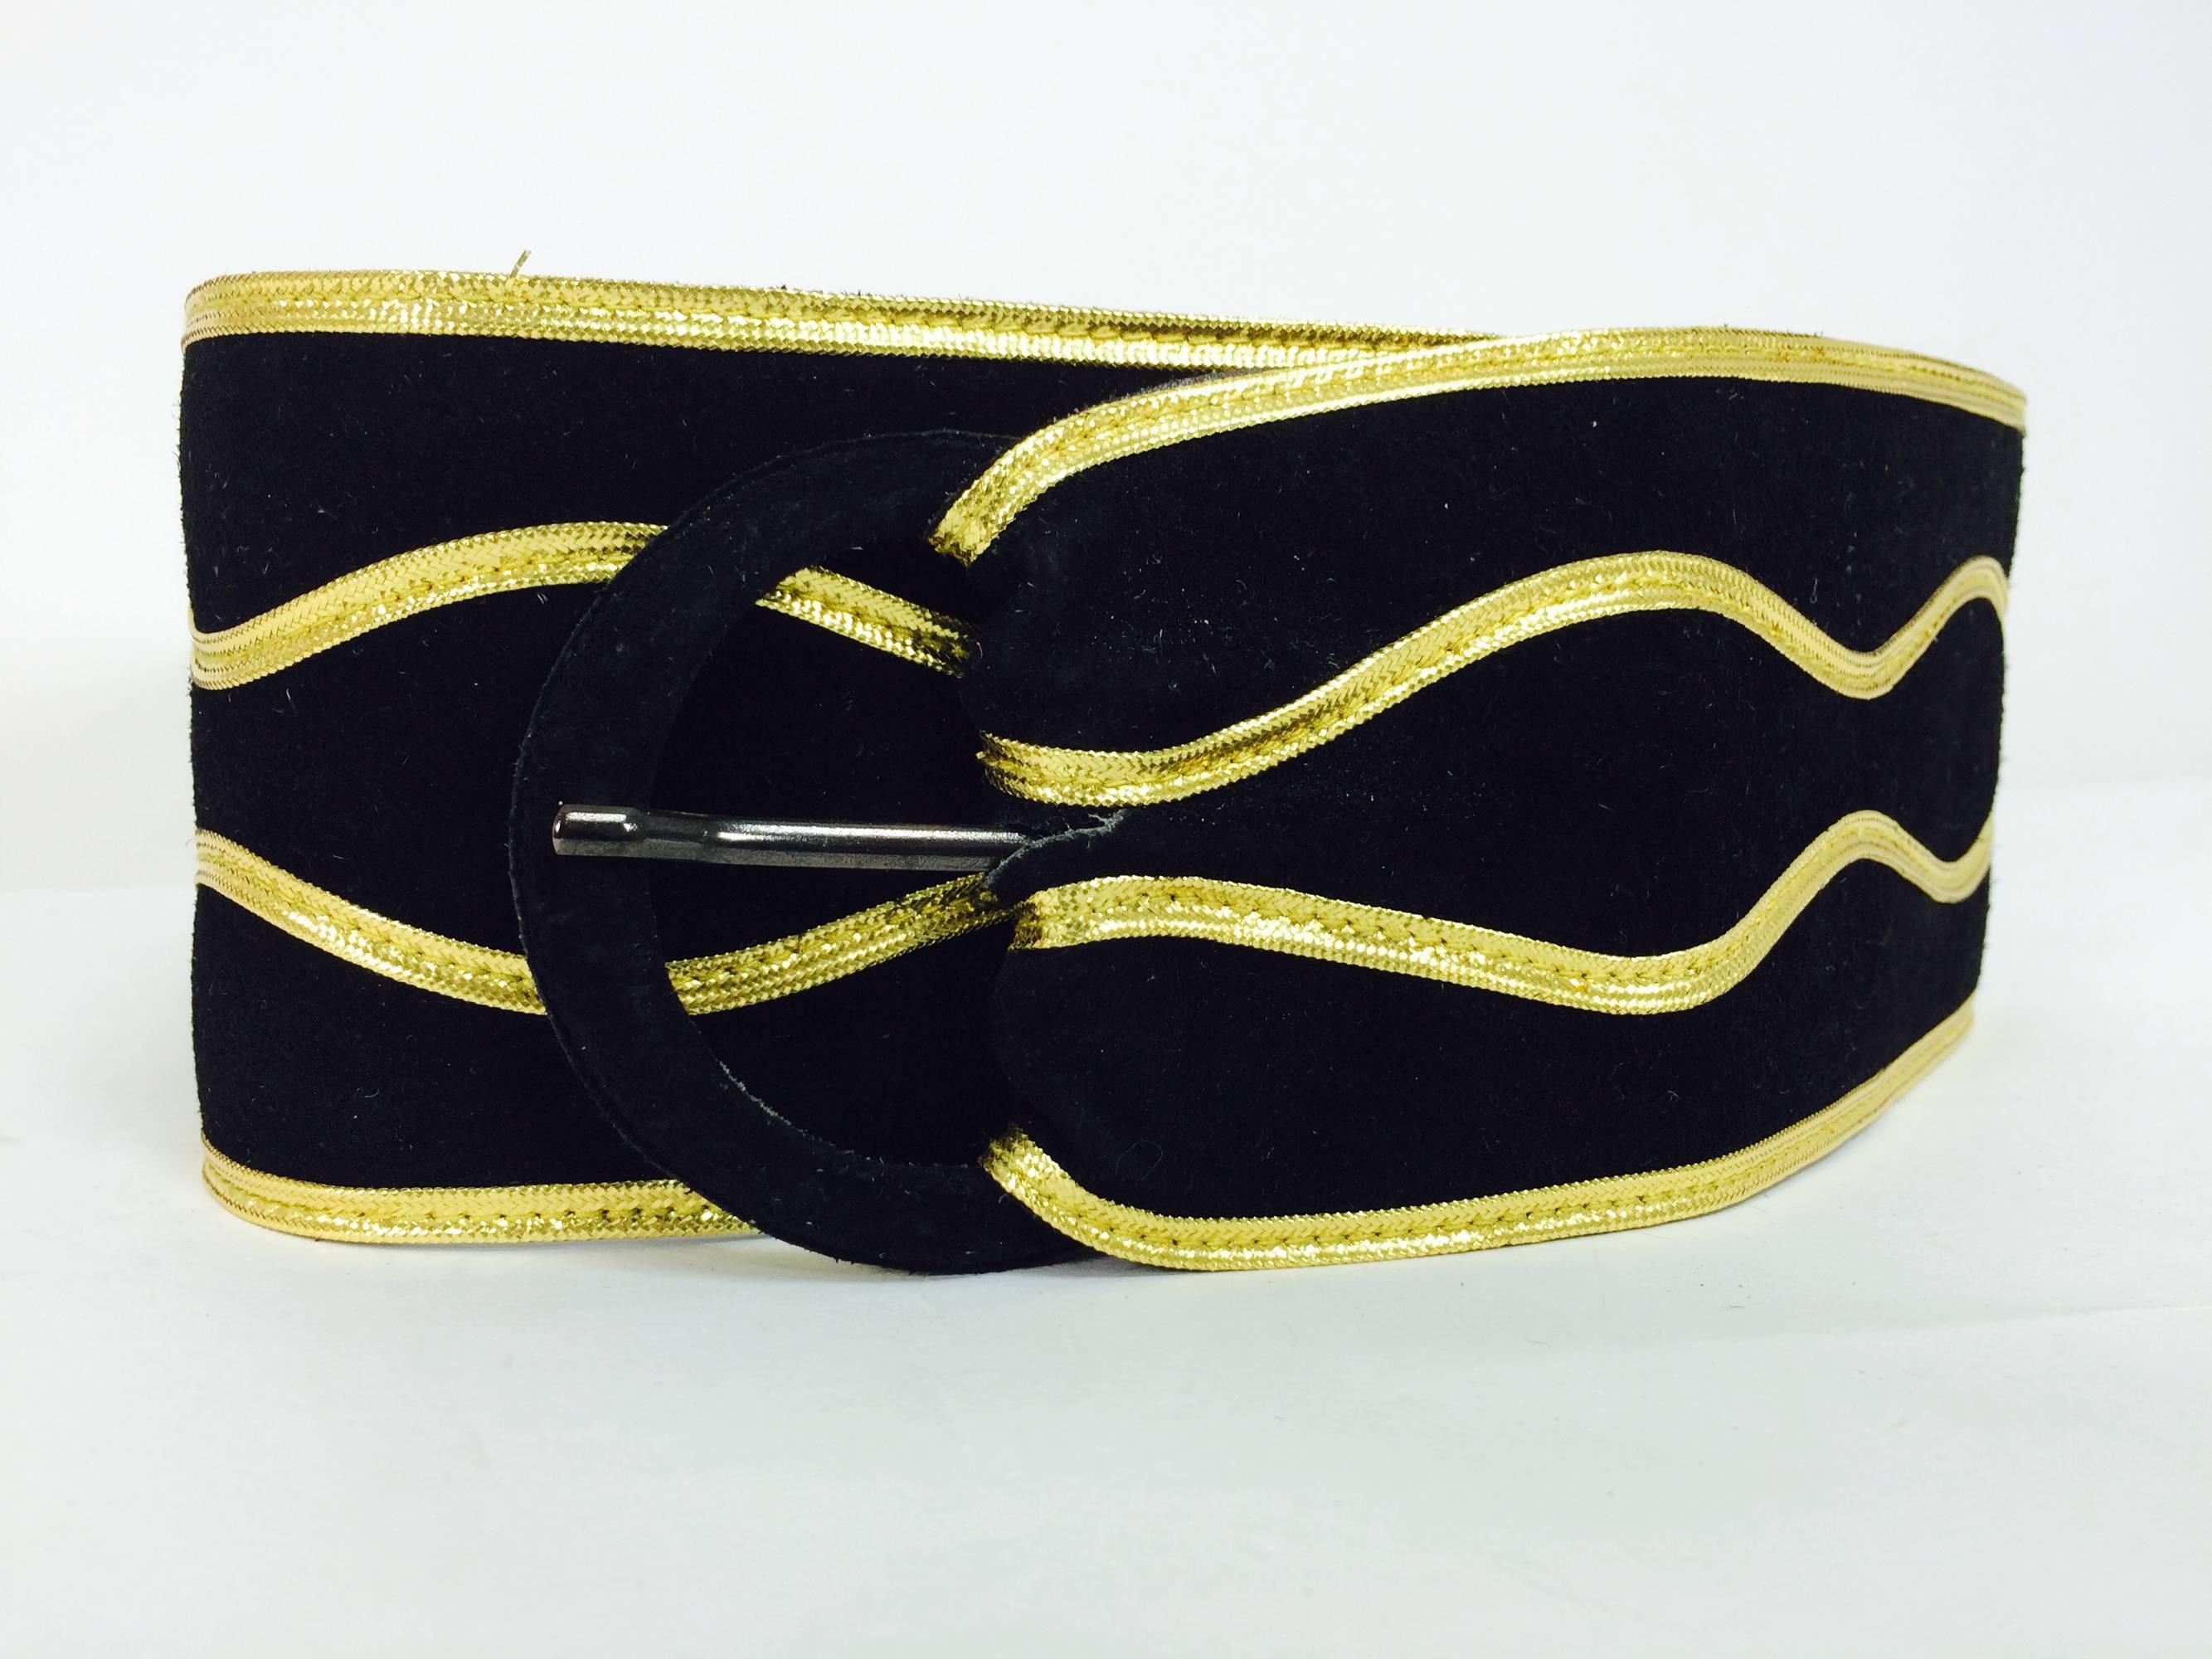 Vintage Yves Saint Laurent wide black suede with gold cord belt 1980s medium...A beautiful belt in well cared for condition...Black suede with gold cord applique and 1/2 round black suede buckle, black leather on the inside...Marked Yves Saint